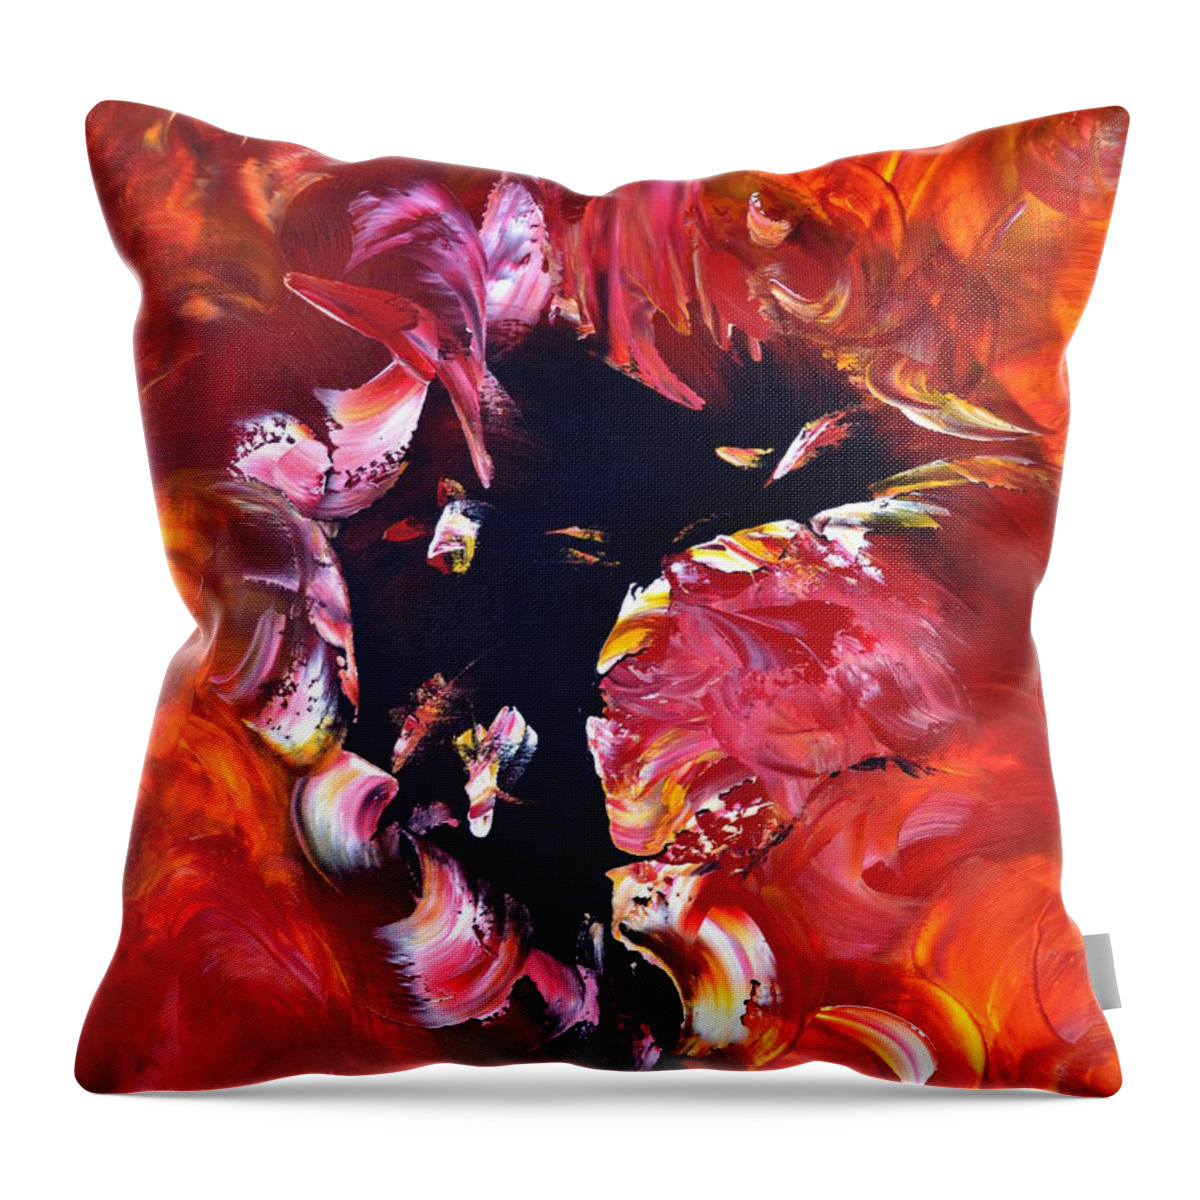 Abstract Throw Pillow featuring the painting Magic night by Isabelle Vobmann